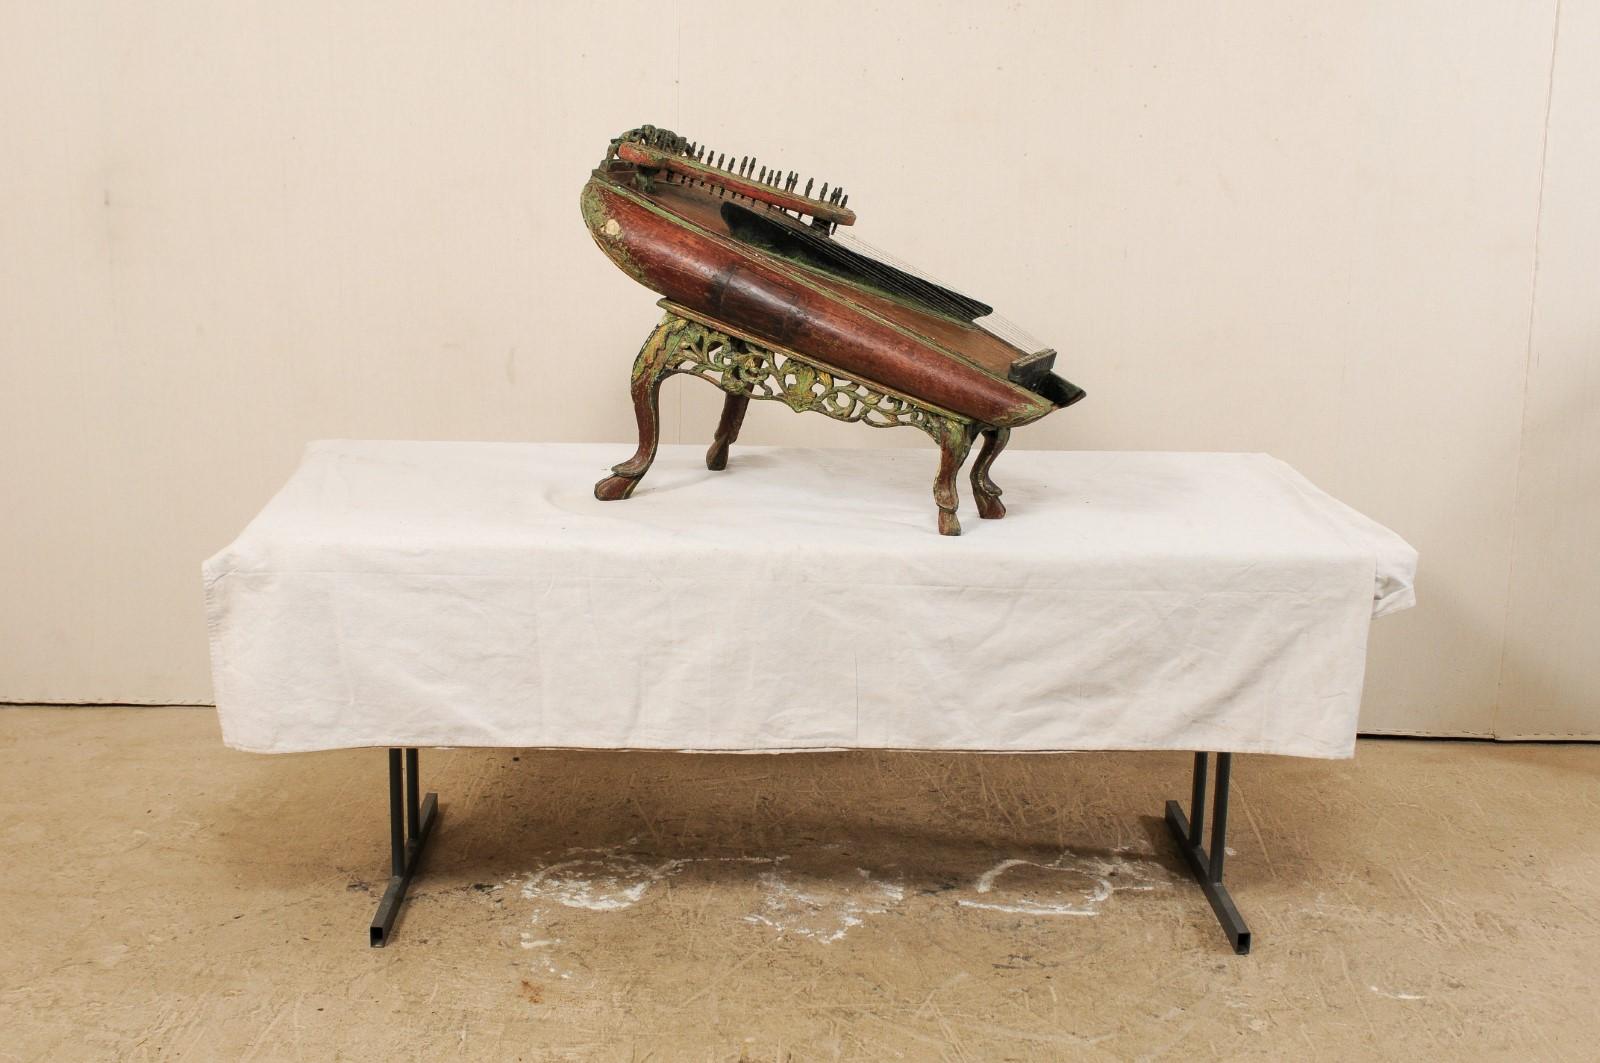 19th Century Celempung Musical Instrument from Java, Indonesia 2